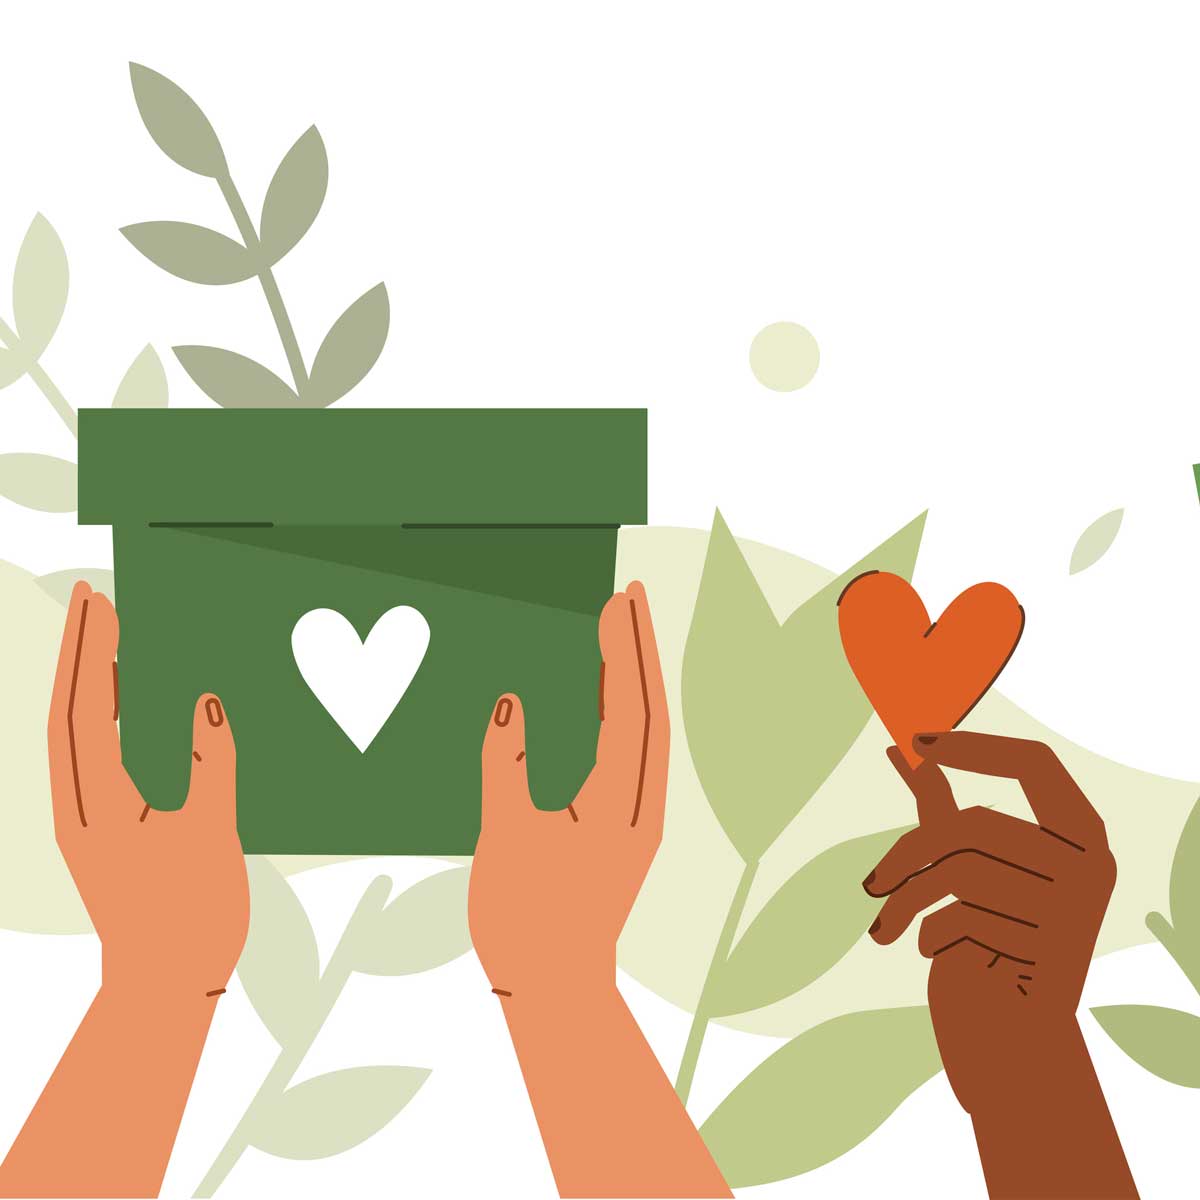 illustration of giving gift of donation; hands holding a box and heart